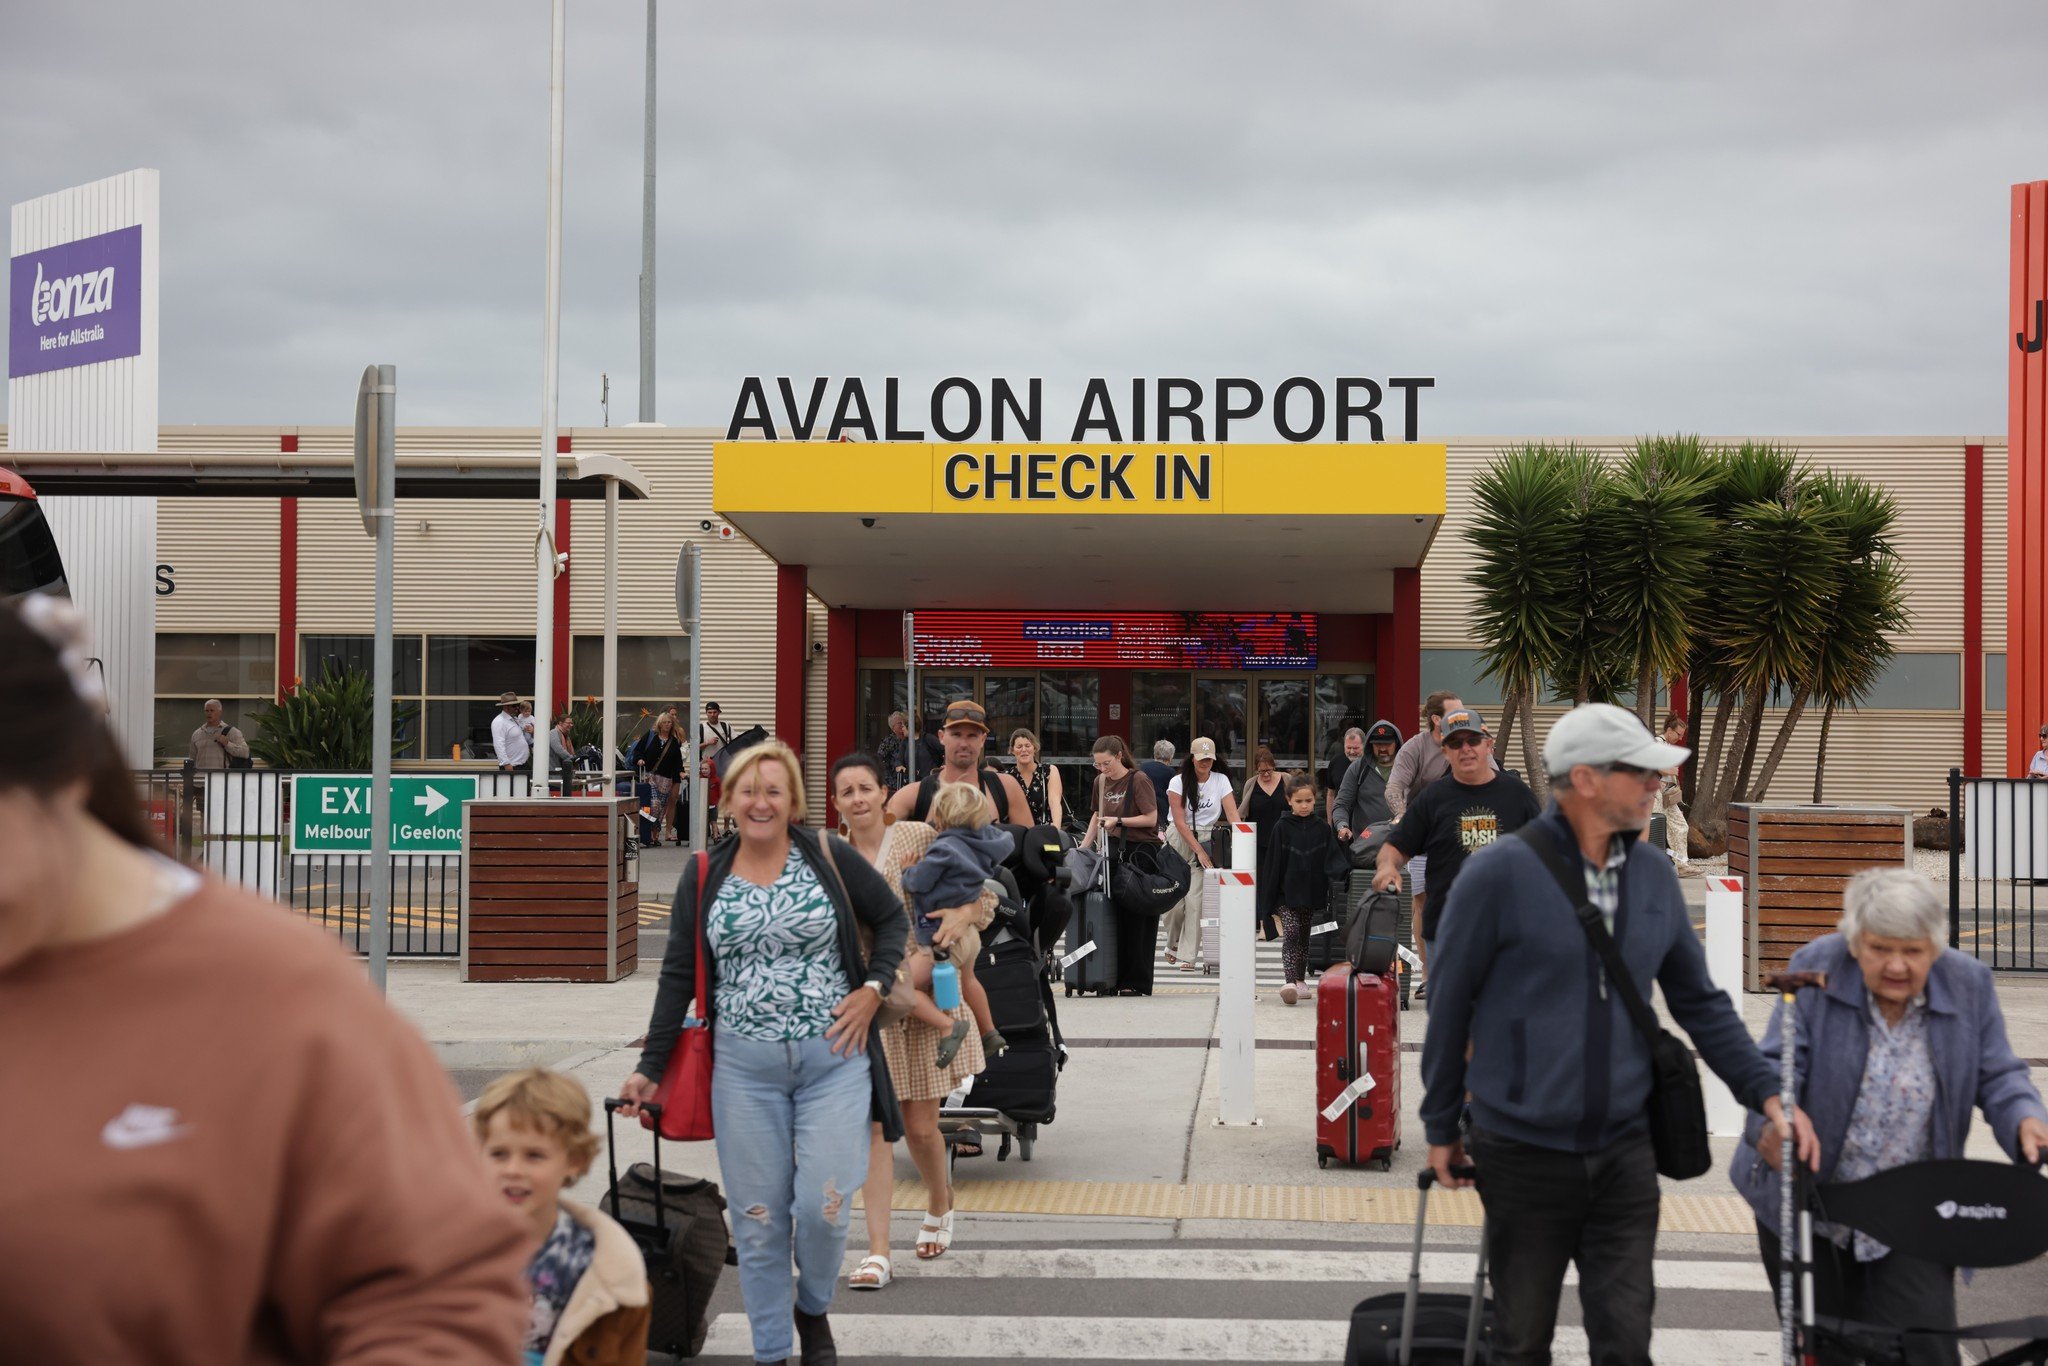 Passengers walk into the entrance of Avalon Airport with their luggage in tow.